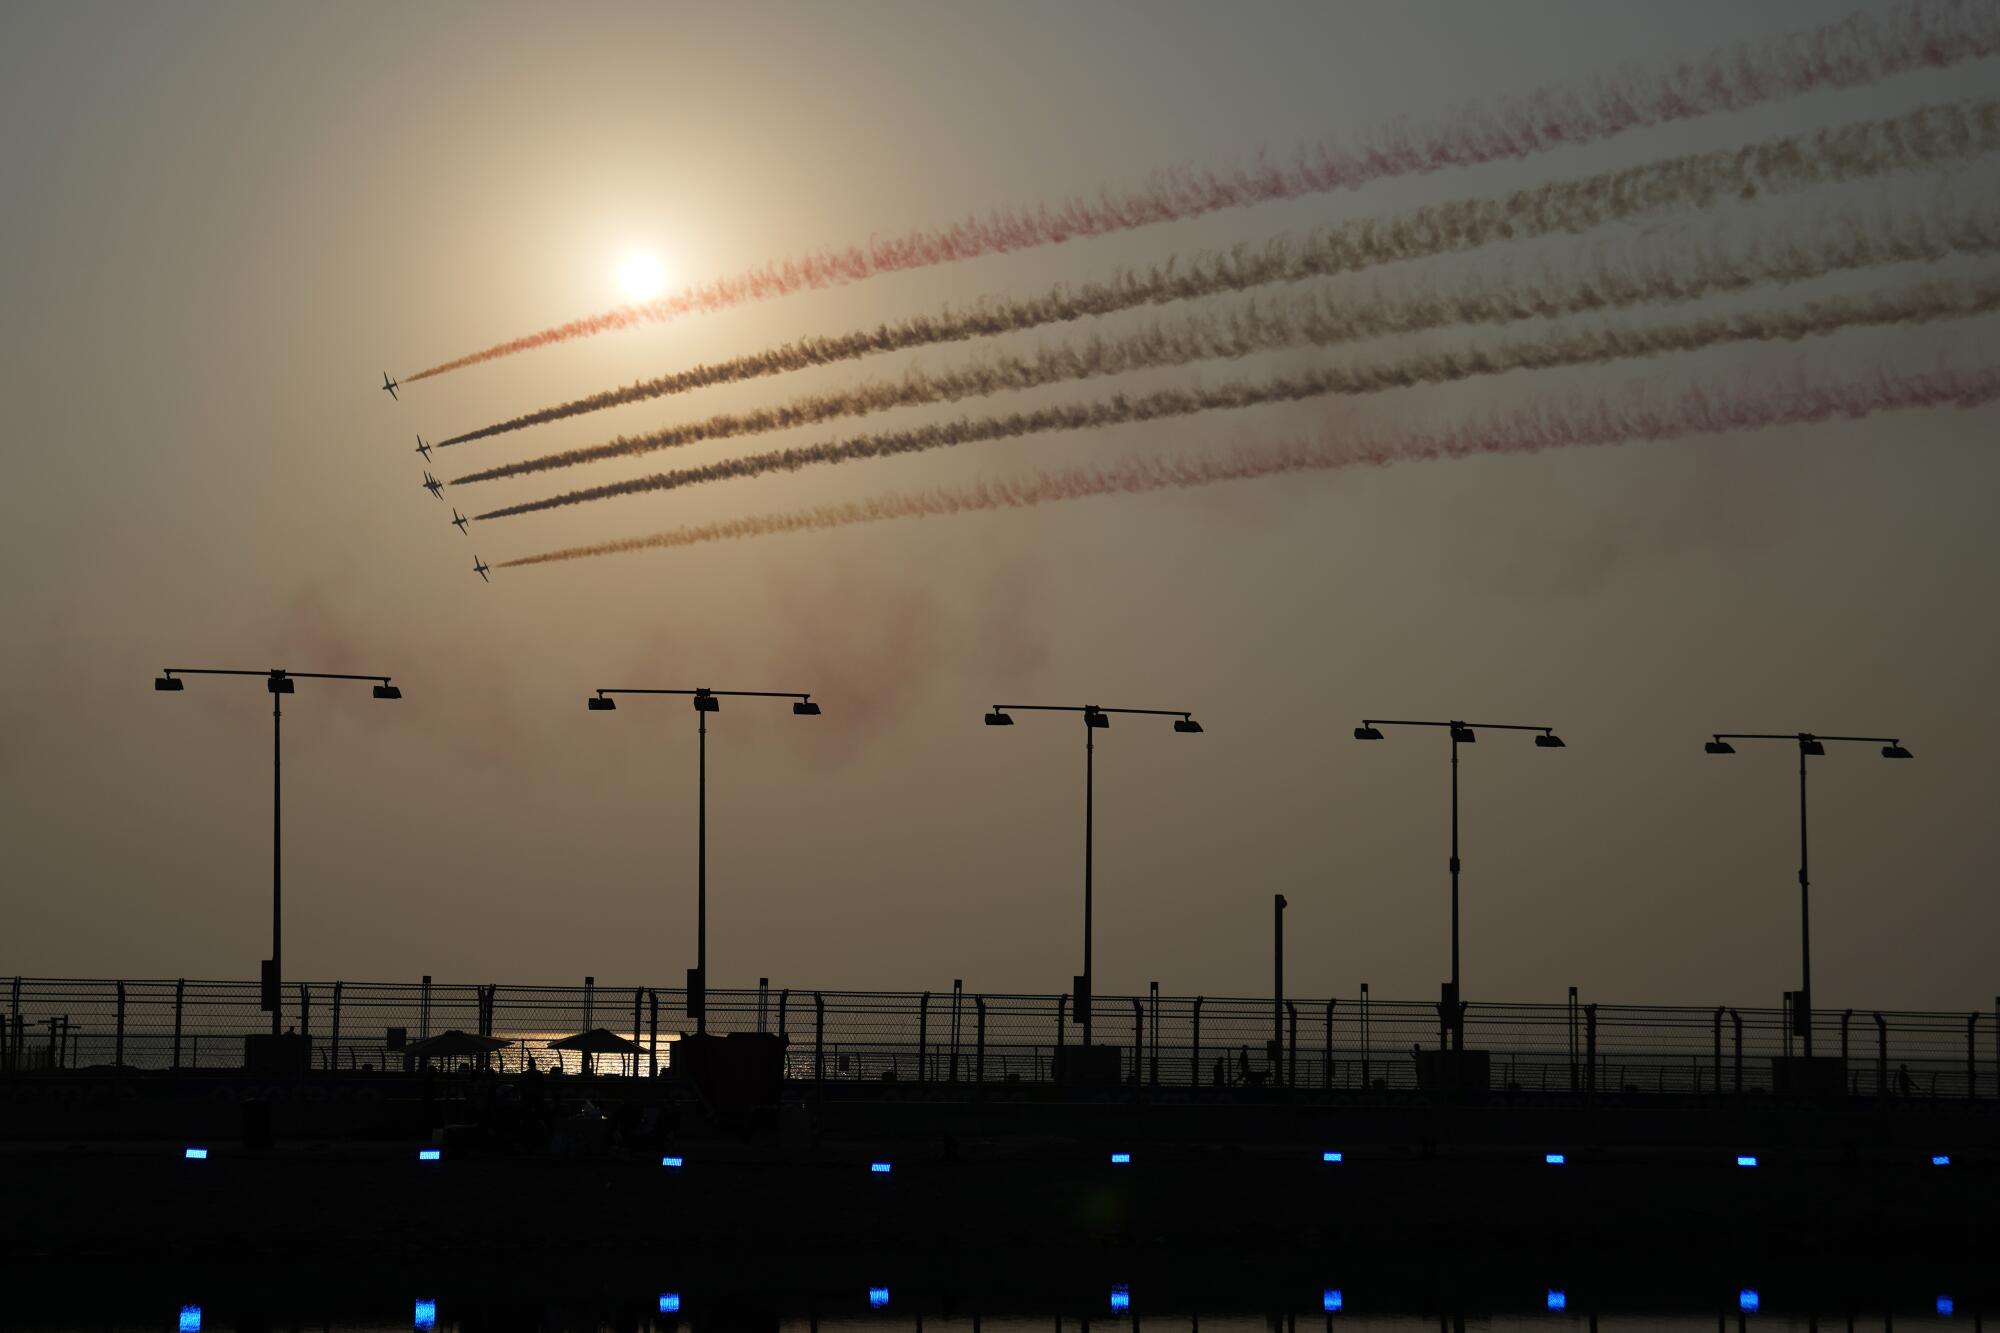 Jets trail streams of color over a racetrack in Saudi Arabia against hazy sun. 